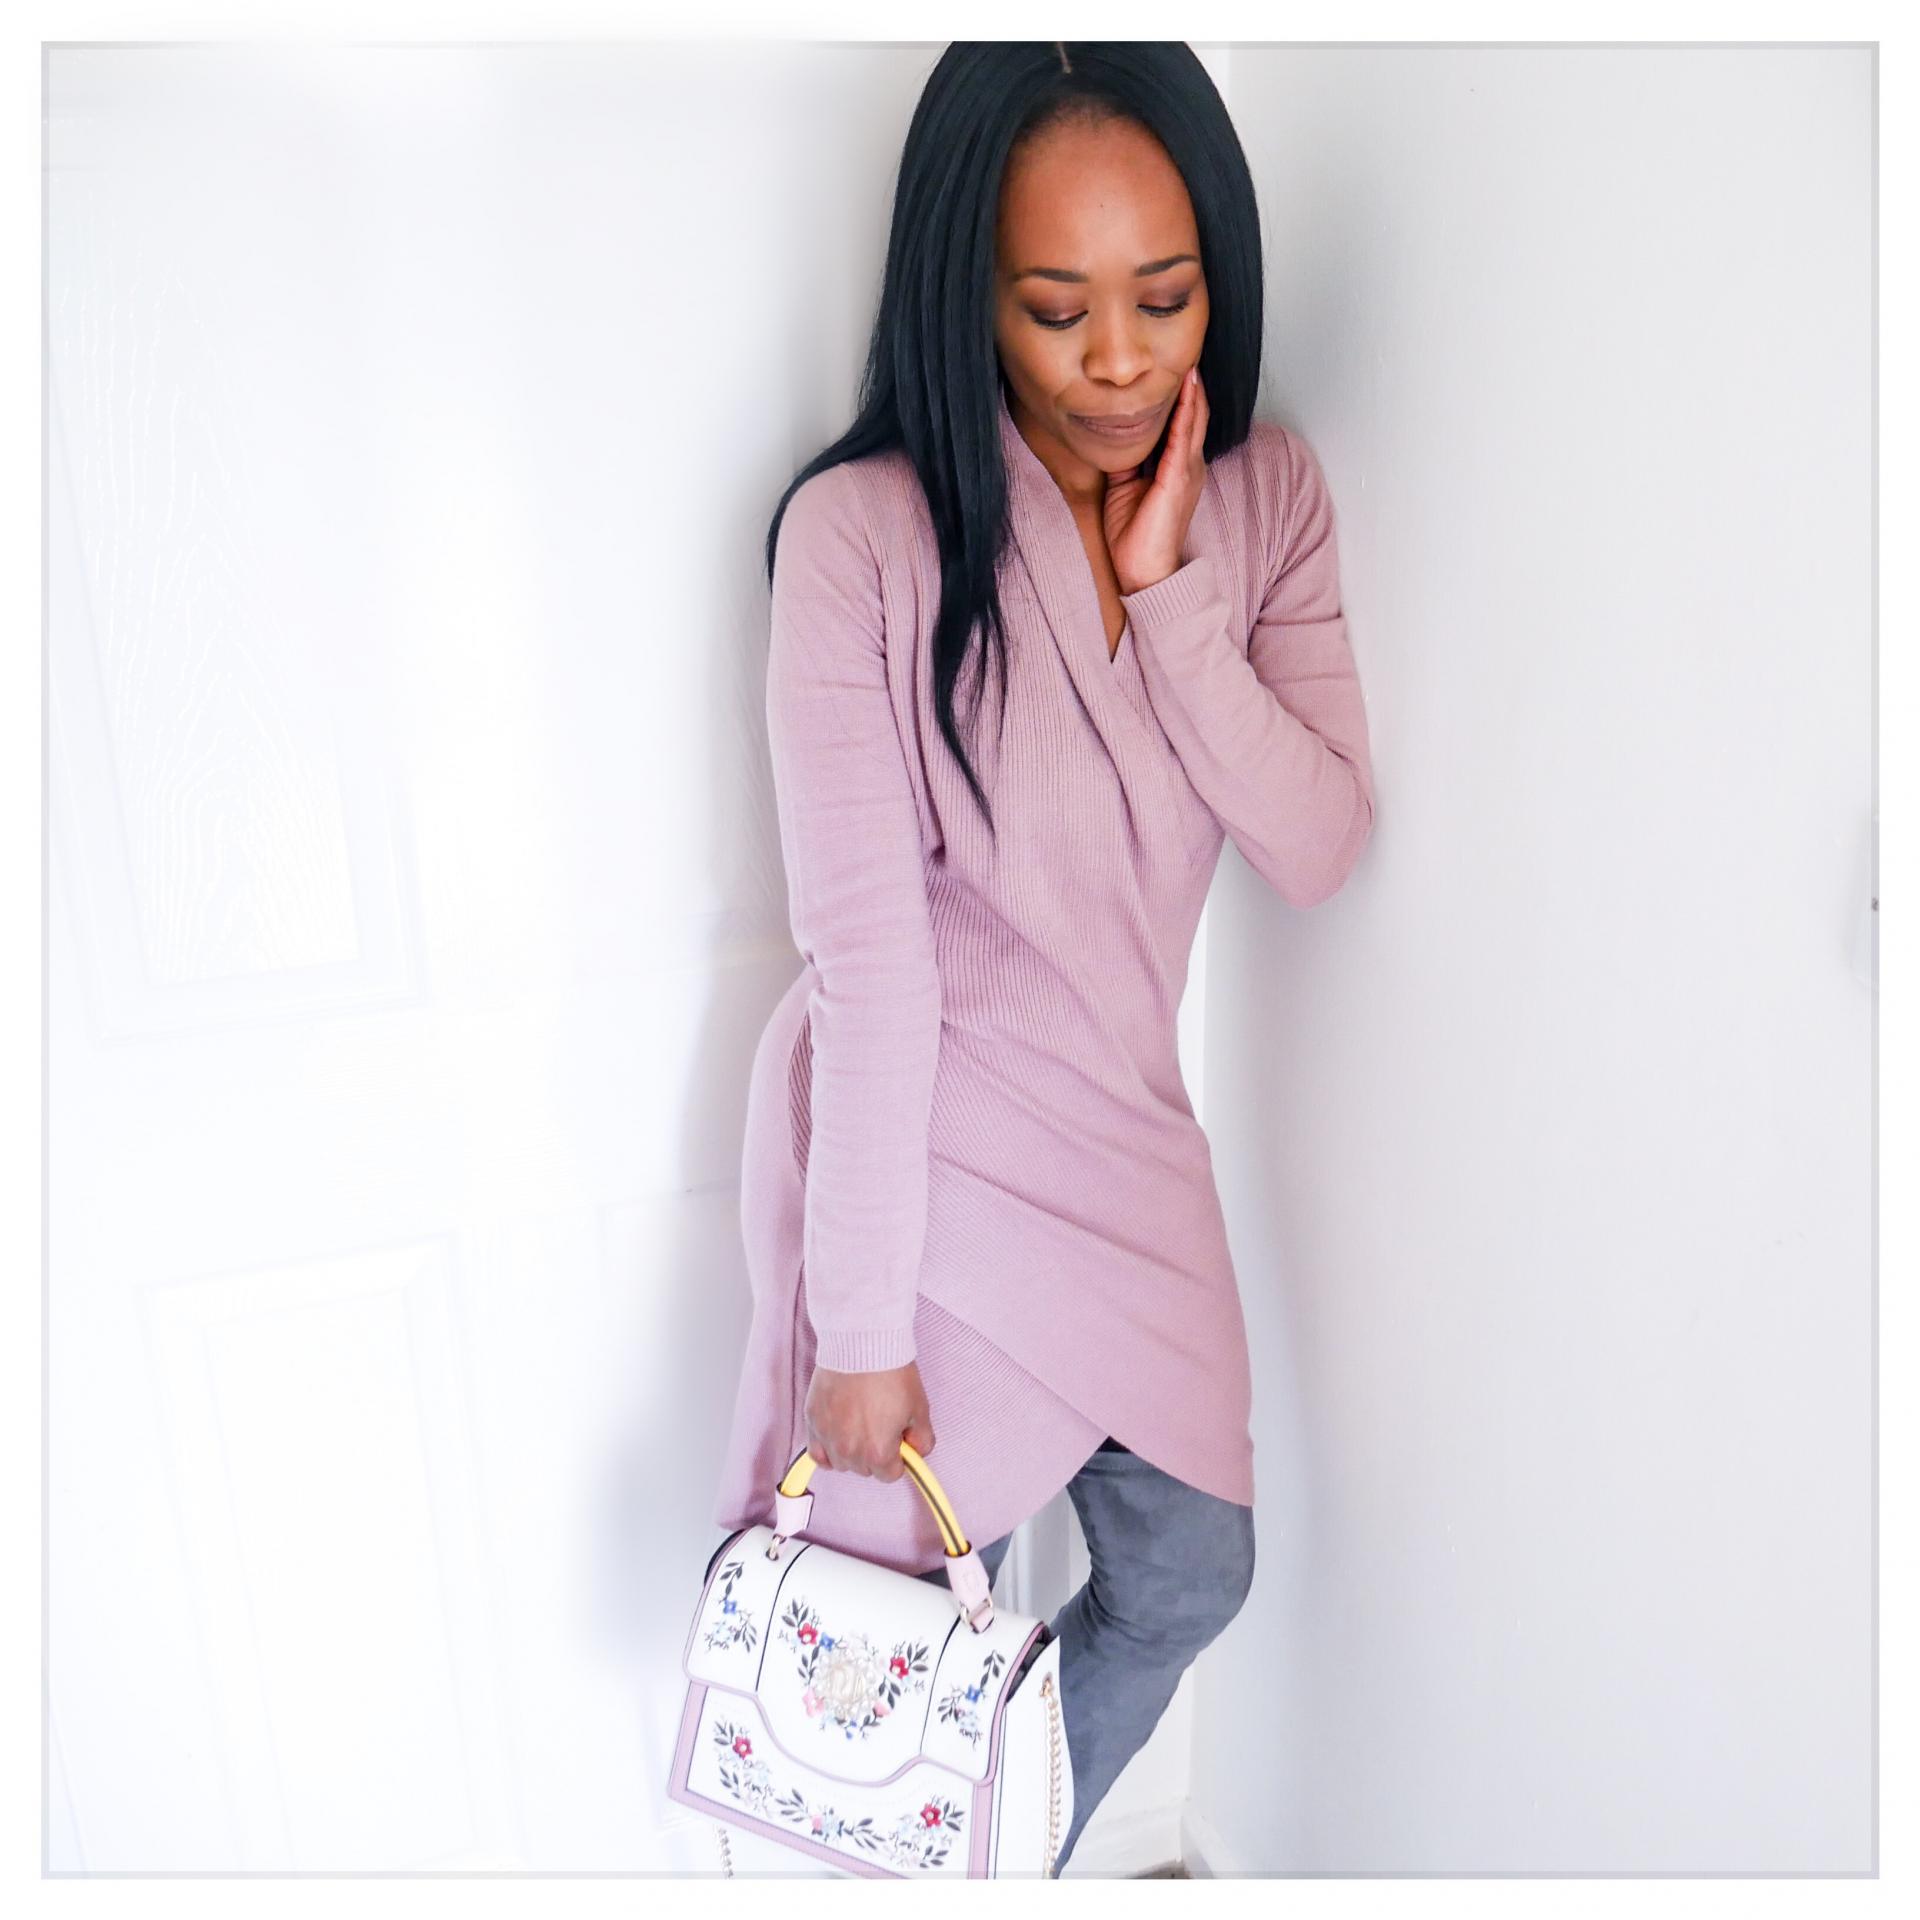 How to Wear Pastels 2019 Updated |Mauve Jumper Dress with Pastel Floral Bag| www.kittyandb.com #Lilac #Pastel #Chic #colourInspiration #OutfitInspiration #ColourPairing #Mauve #Embroidery #bag #PinkAesthetic